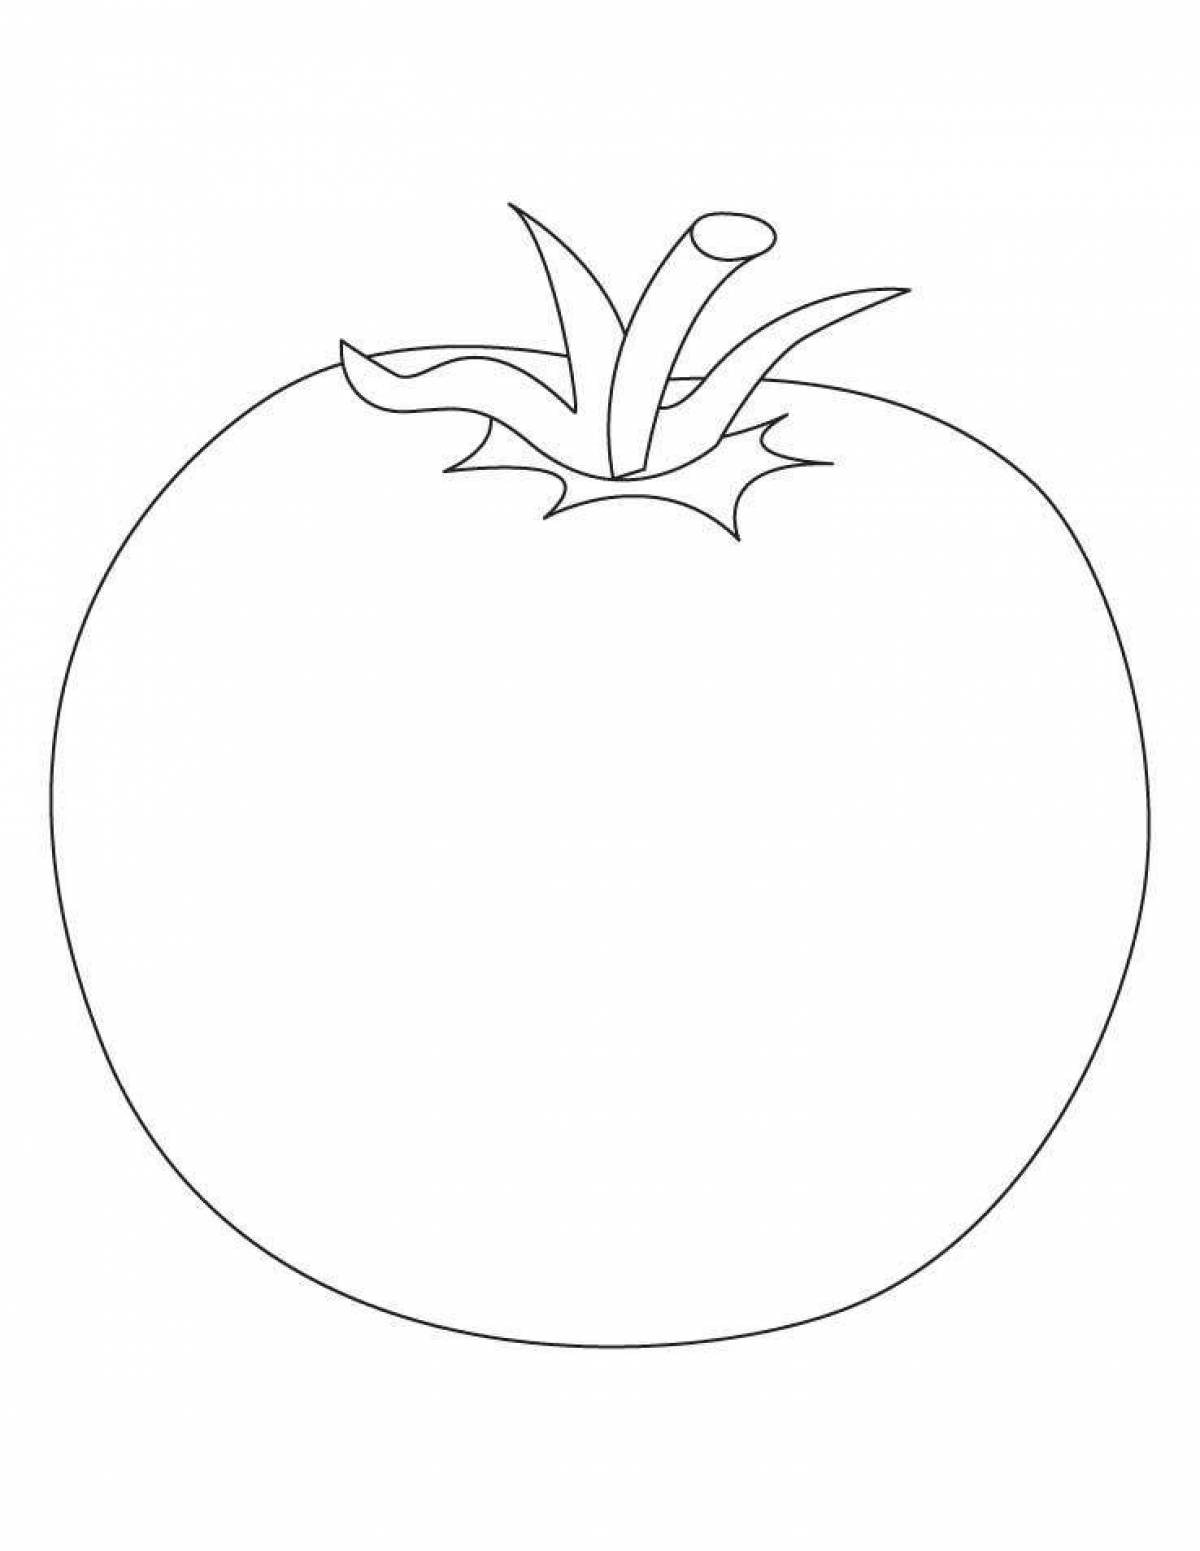 Adorable tomato coloring book for kids